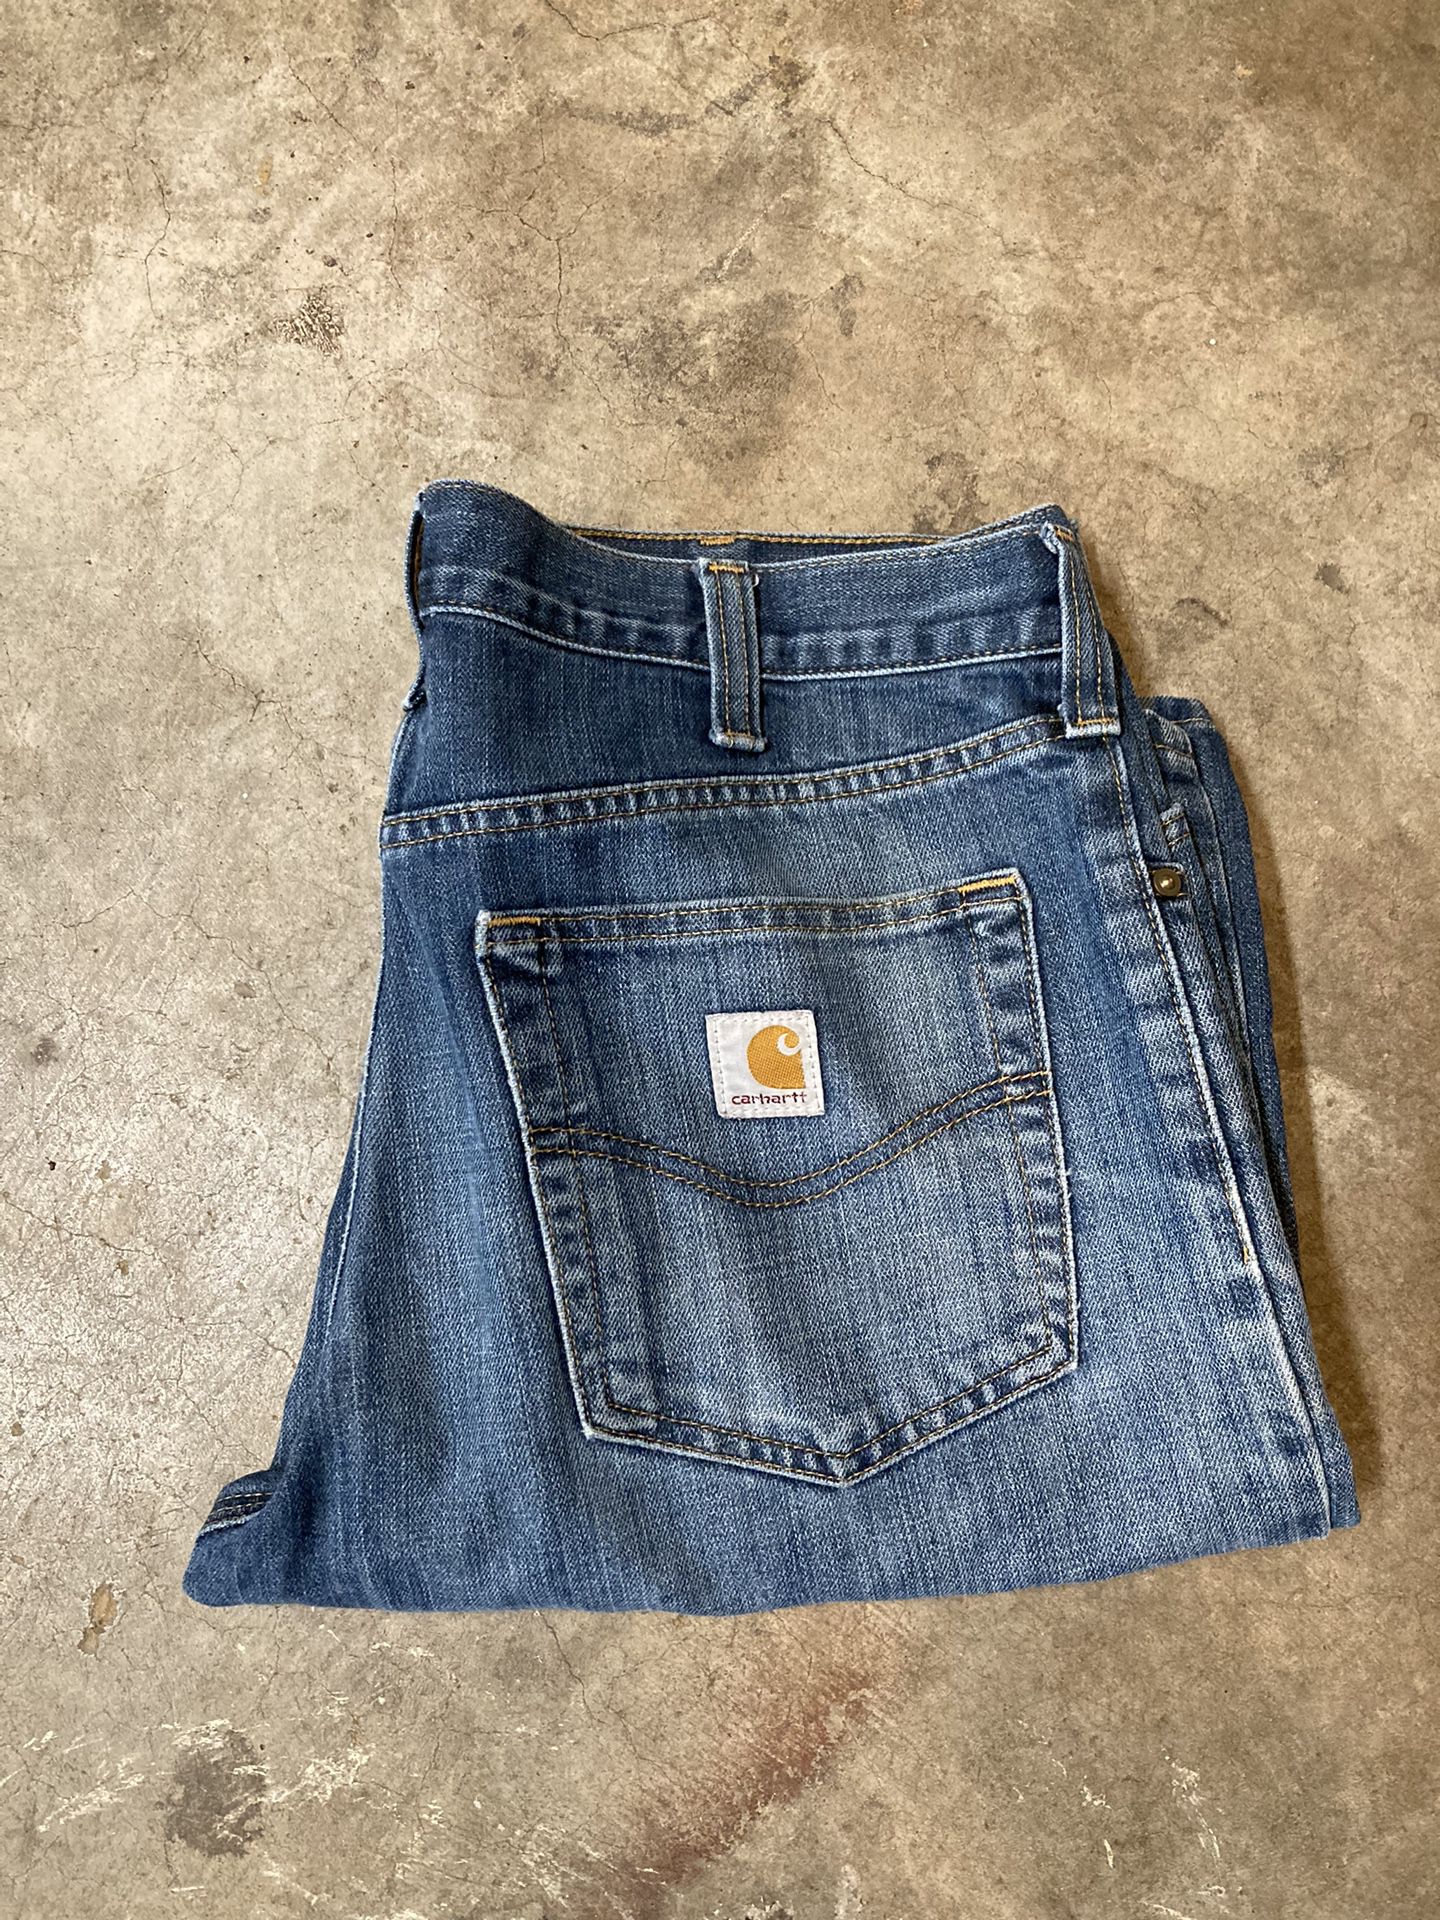 Carhartt Relaxed Fit Jeans Size 33x30